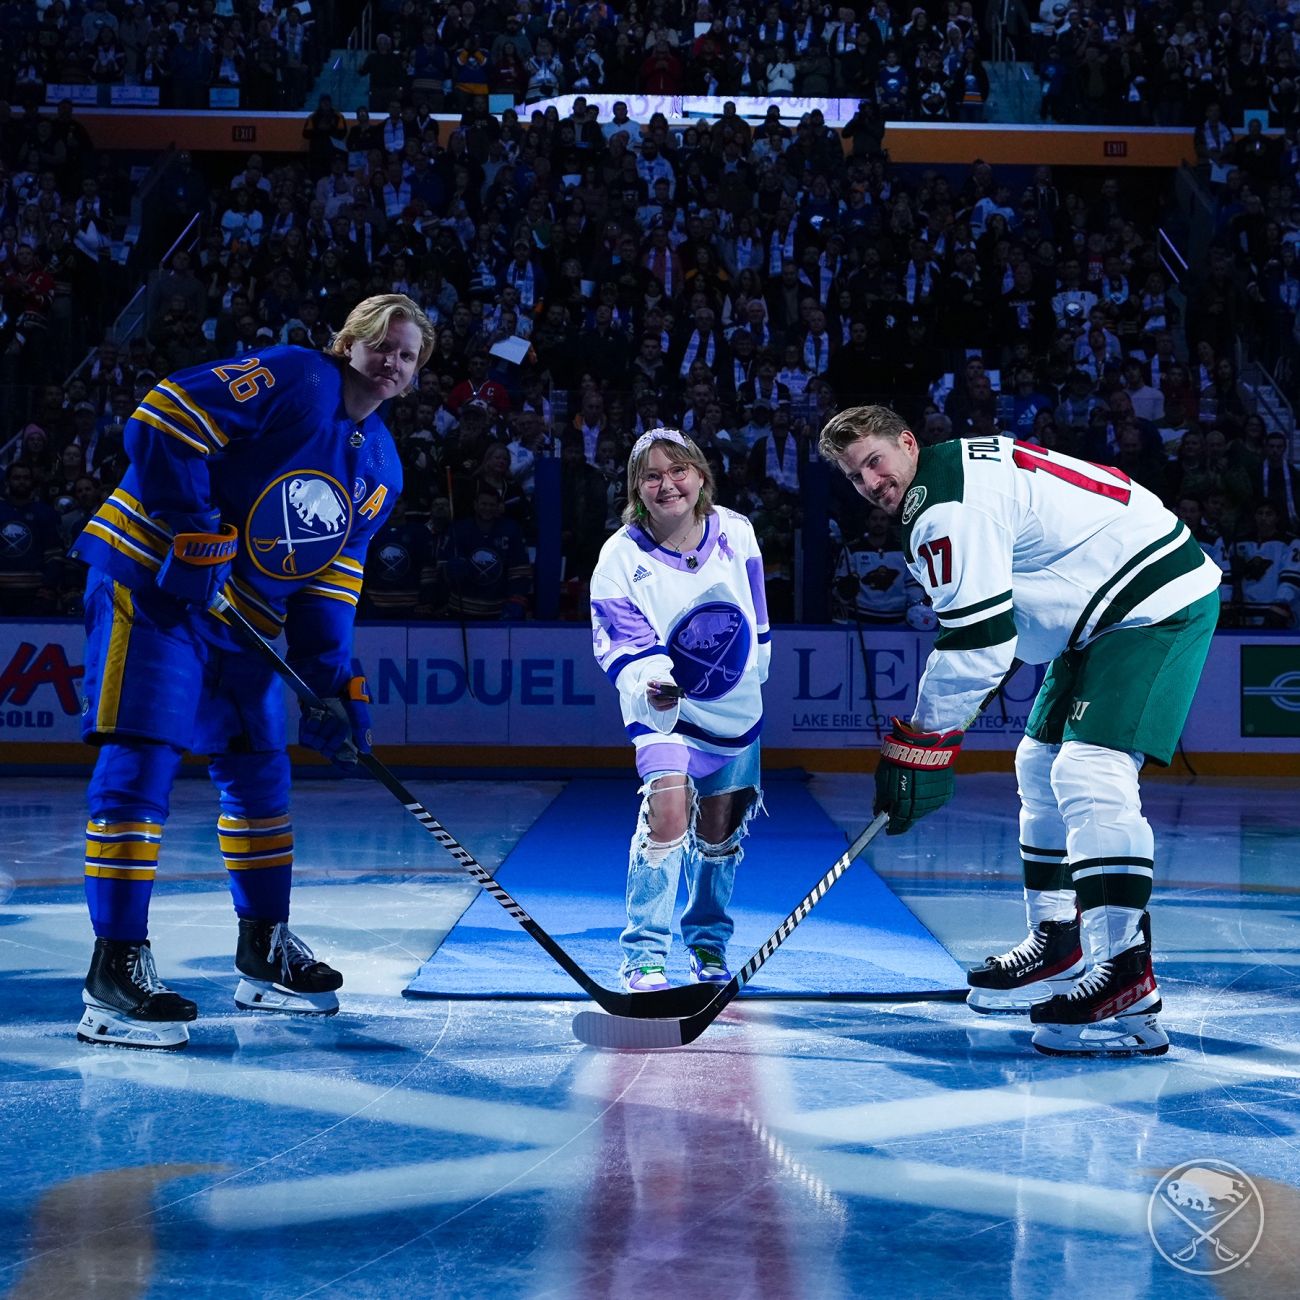 Sophia, a Roswell Park pediatric patient, drops the puck at Hockey Fights Cancer night with the Buffalo Sabres.